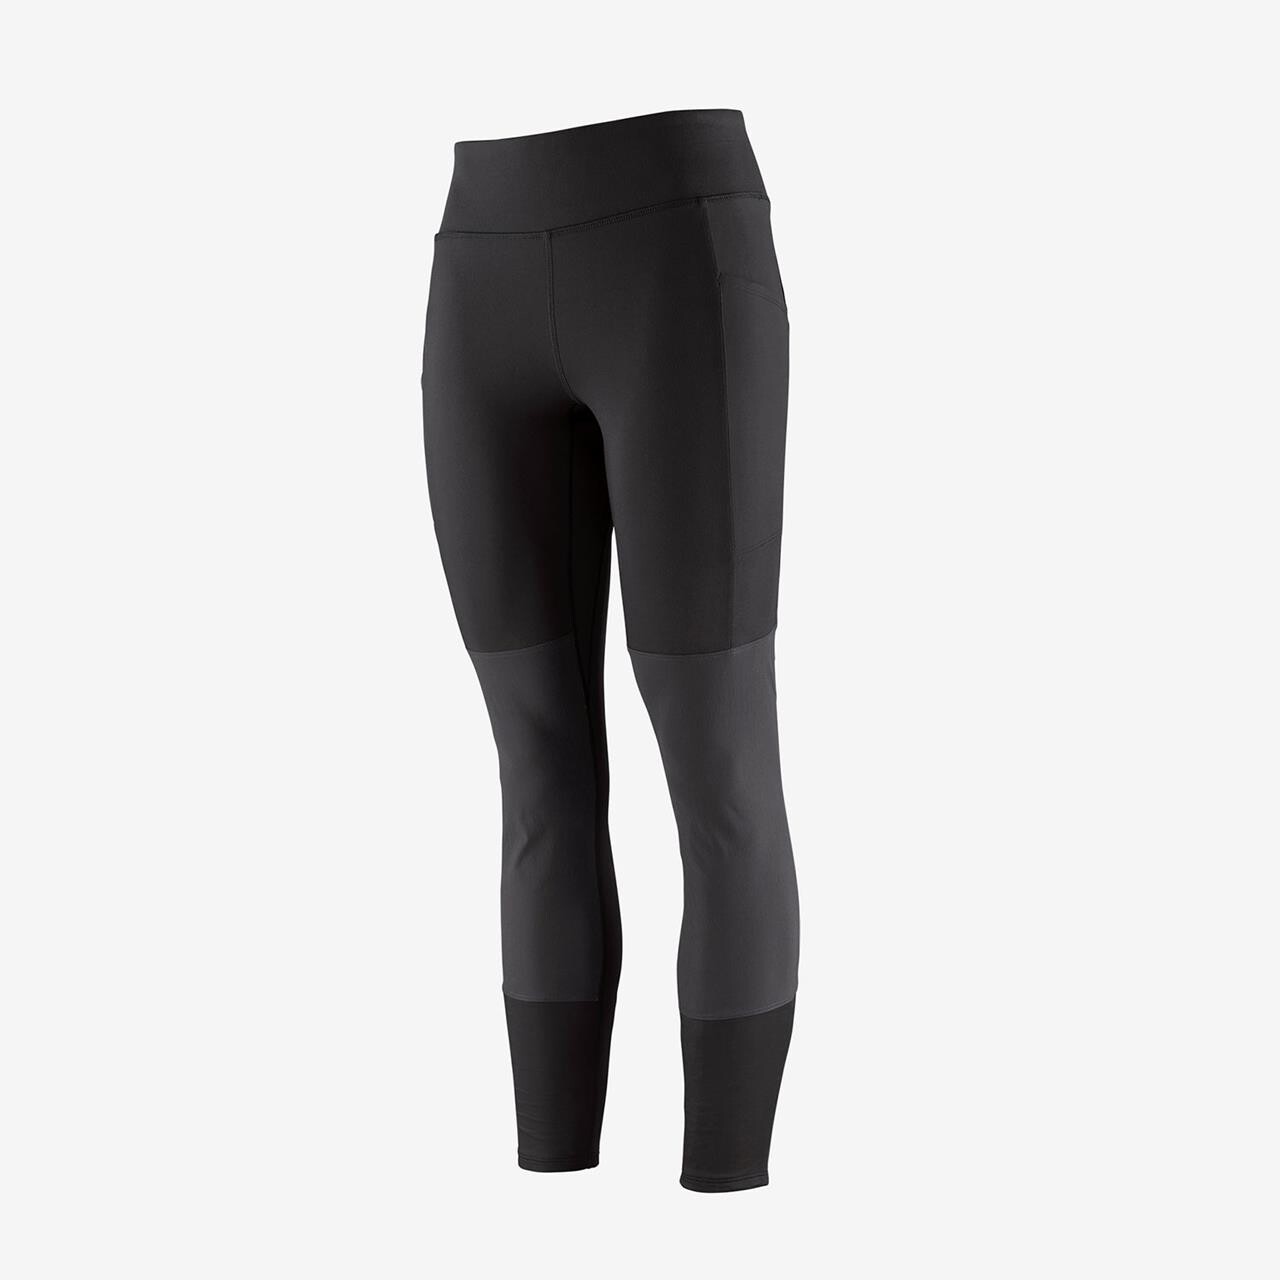 8: Patagonia Womens Pack Out Hike Tights (Sort (BLACK) Small)